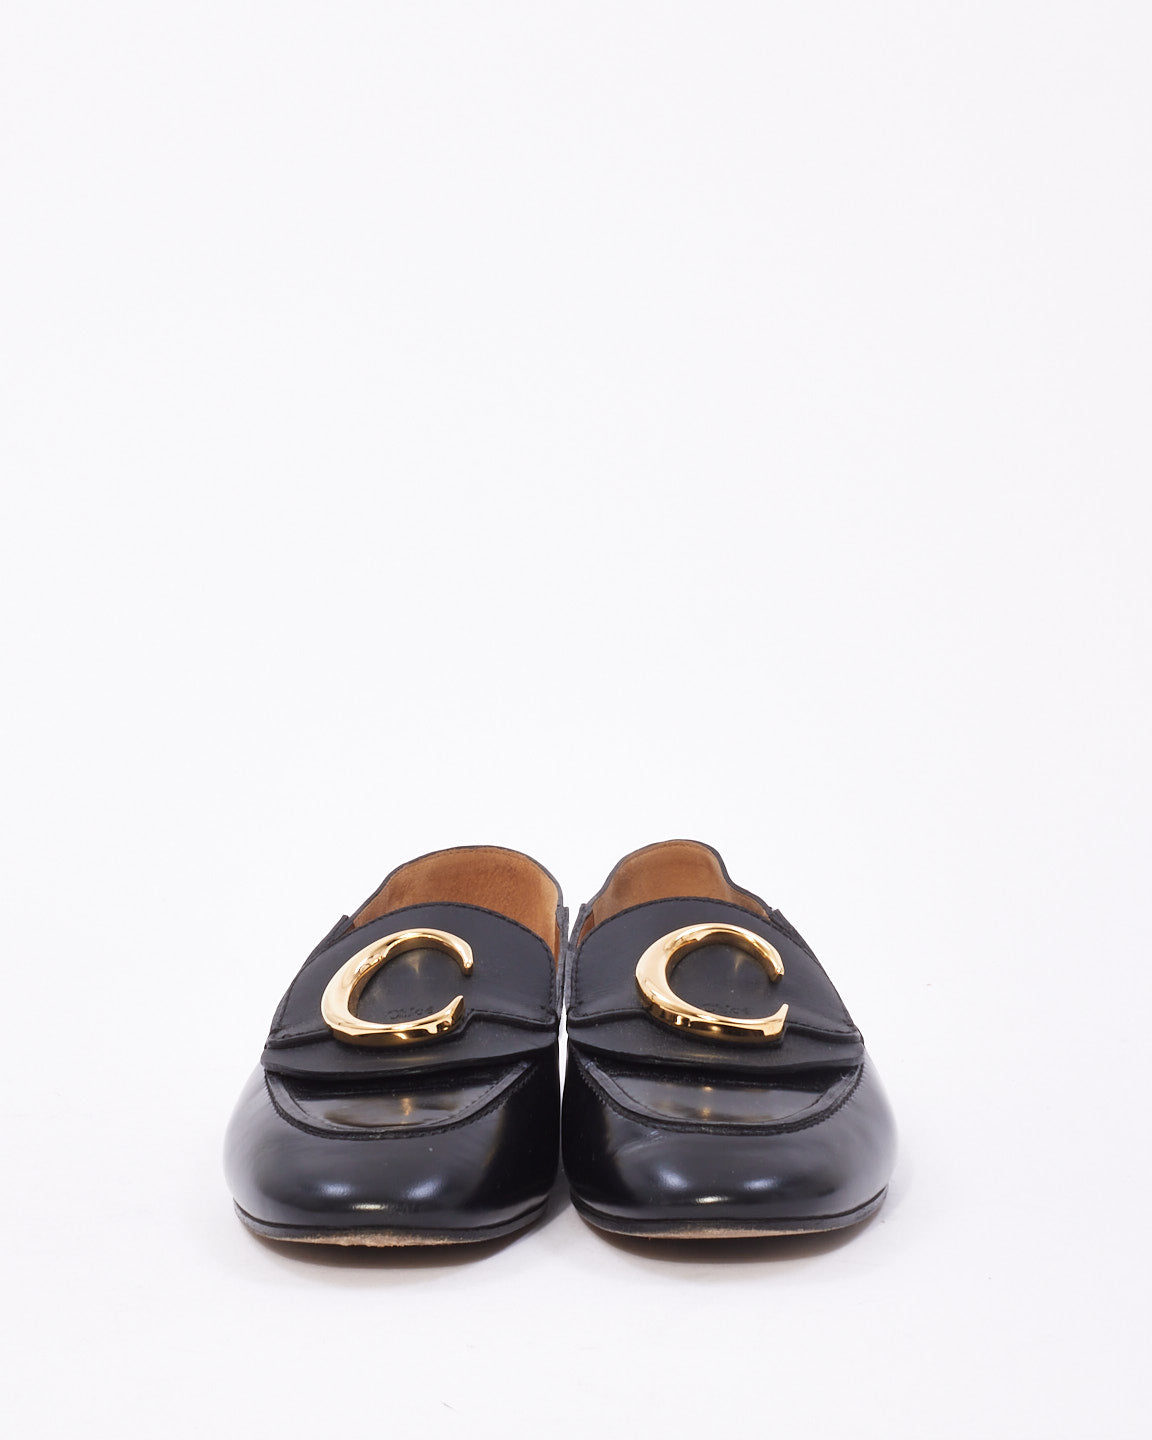 Chloé Black Leather C Loafers - 36.5